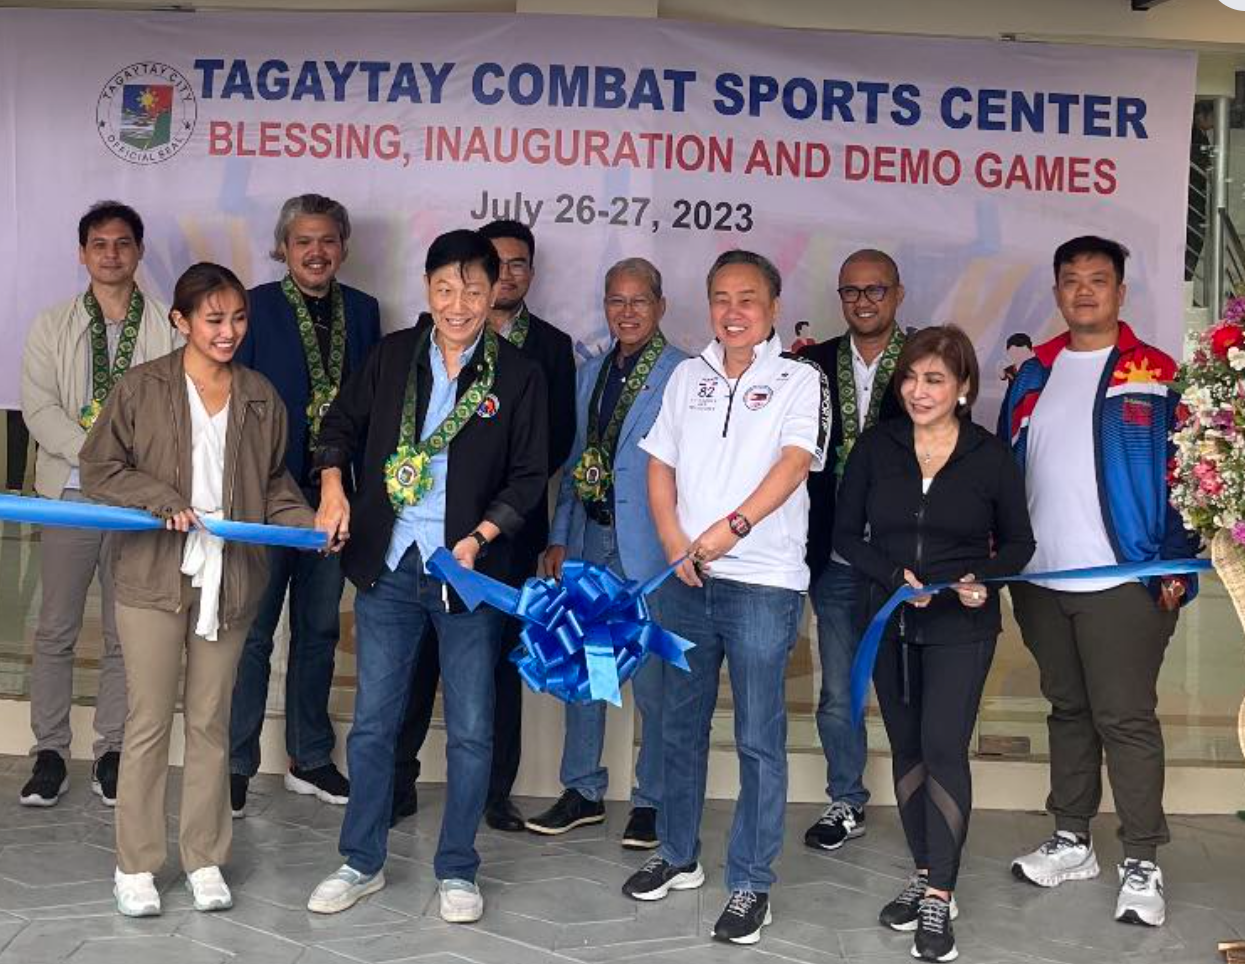 PHILIPPINE Olympic Committee President Rep. Abraham “Bambol” Tolentino (front, third from left) and Philippine Sports Commission Commissioner Edward Hayco (front, second from left) lead the ribbon-cutting ceremony with (front, from left) Cavite Vice Governor Athena Tolentino and Tagaytay City Vice Mayor Agnes Tolentino, DMD, as well as combat sports officials (rear, from left) Alvin Aguilar (president, wrestling), Jose Malonzo (secretary-general, Vovinam), Alexander Sulit (president, judo), Tongson Rene (secretary-general, arnis), Ferdie Agustin (president, jiu-jitsu) and Atty. Wharton Chan (secretary-general, kickboxing).